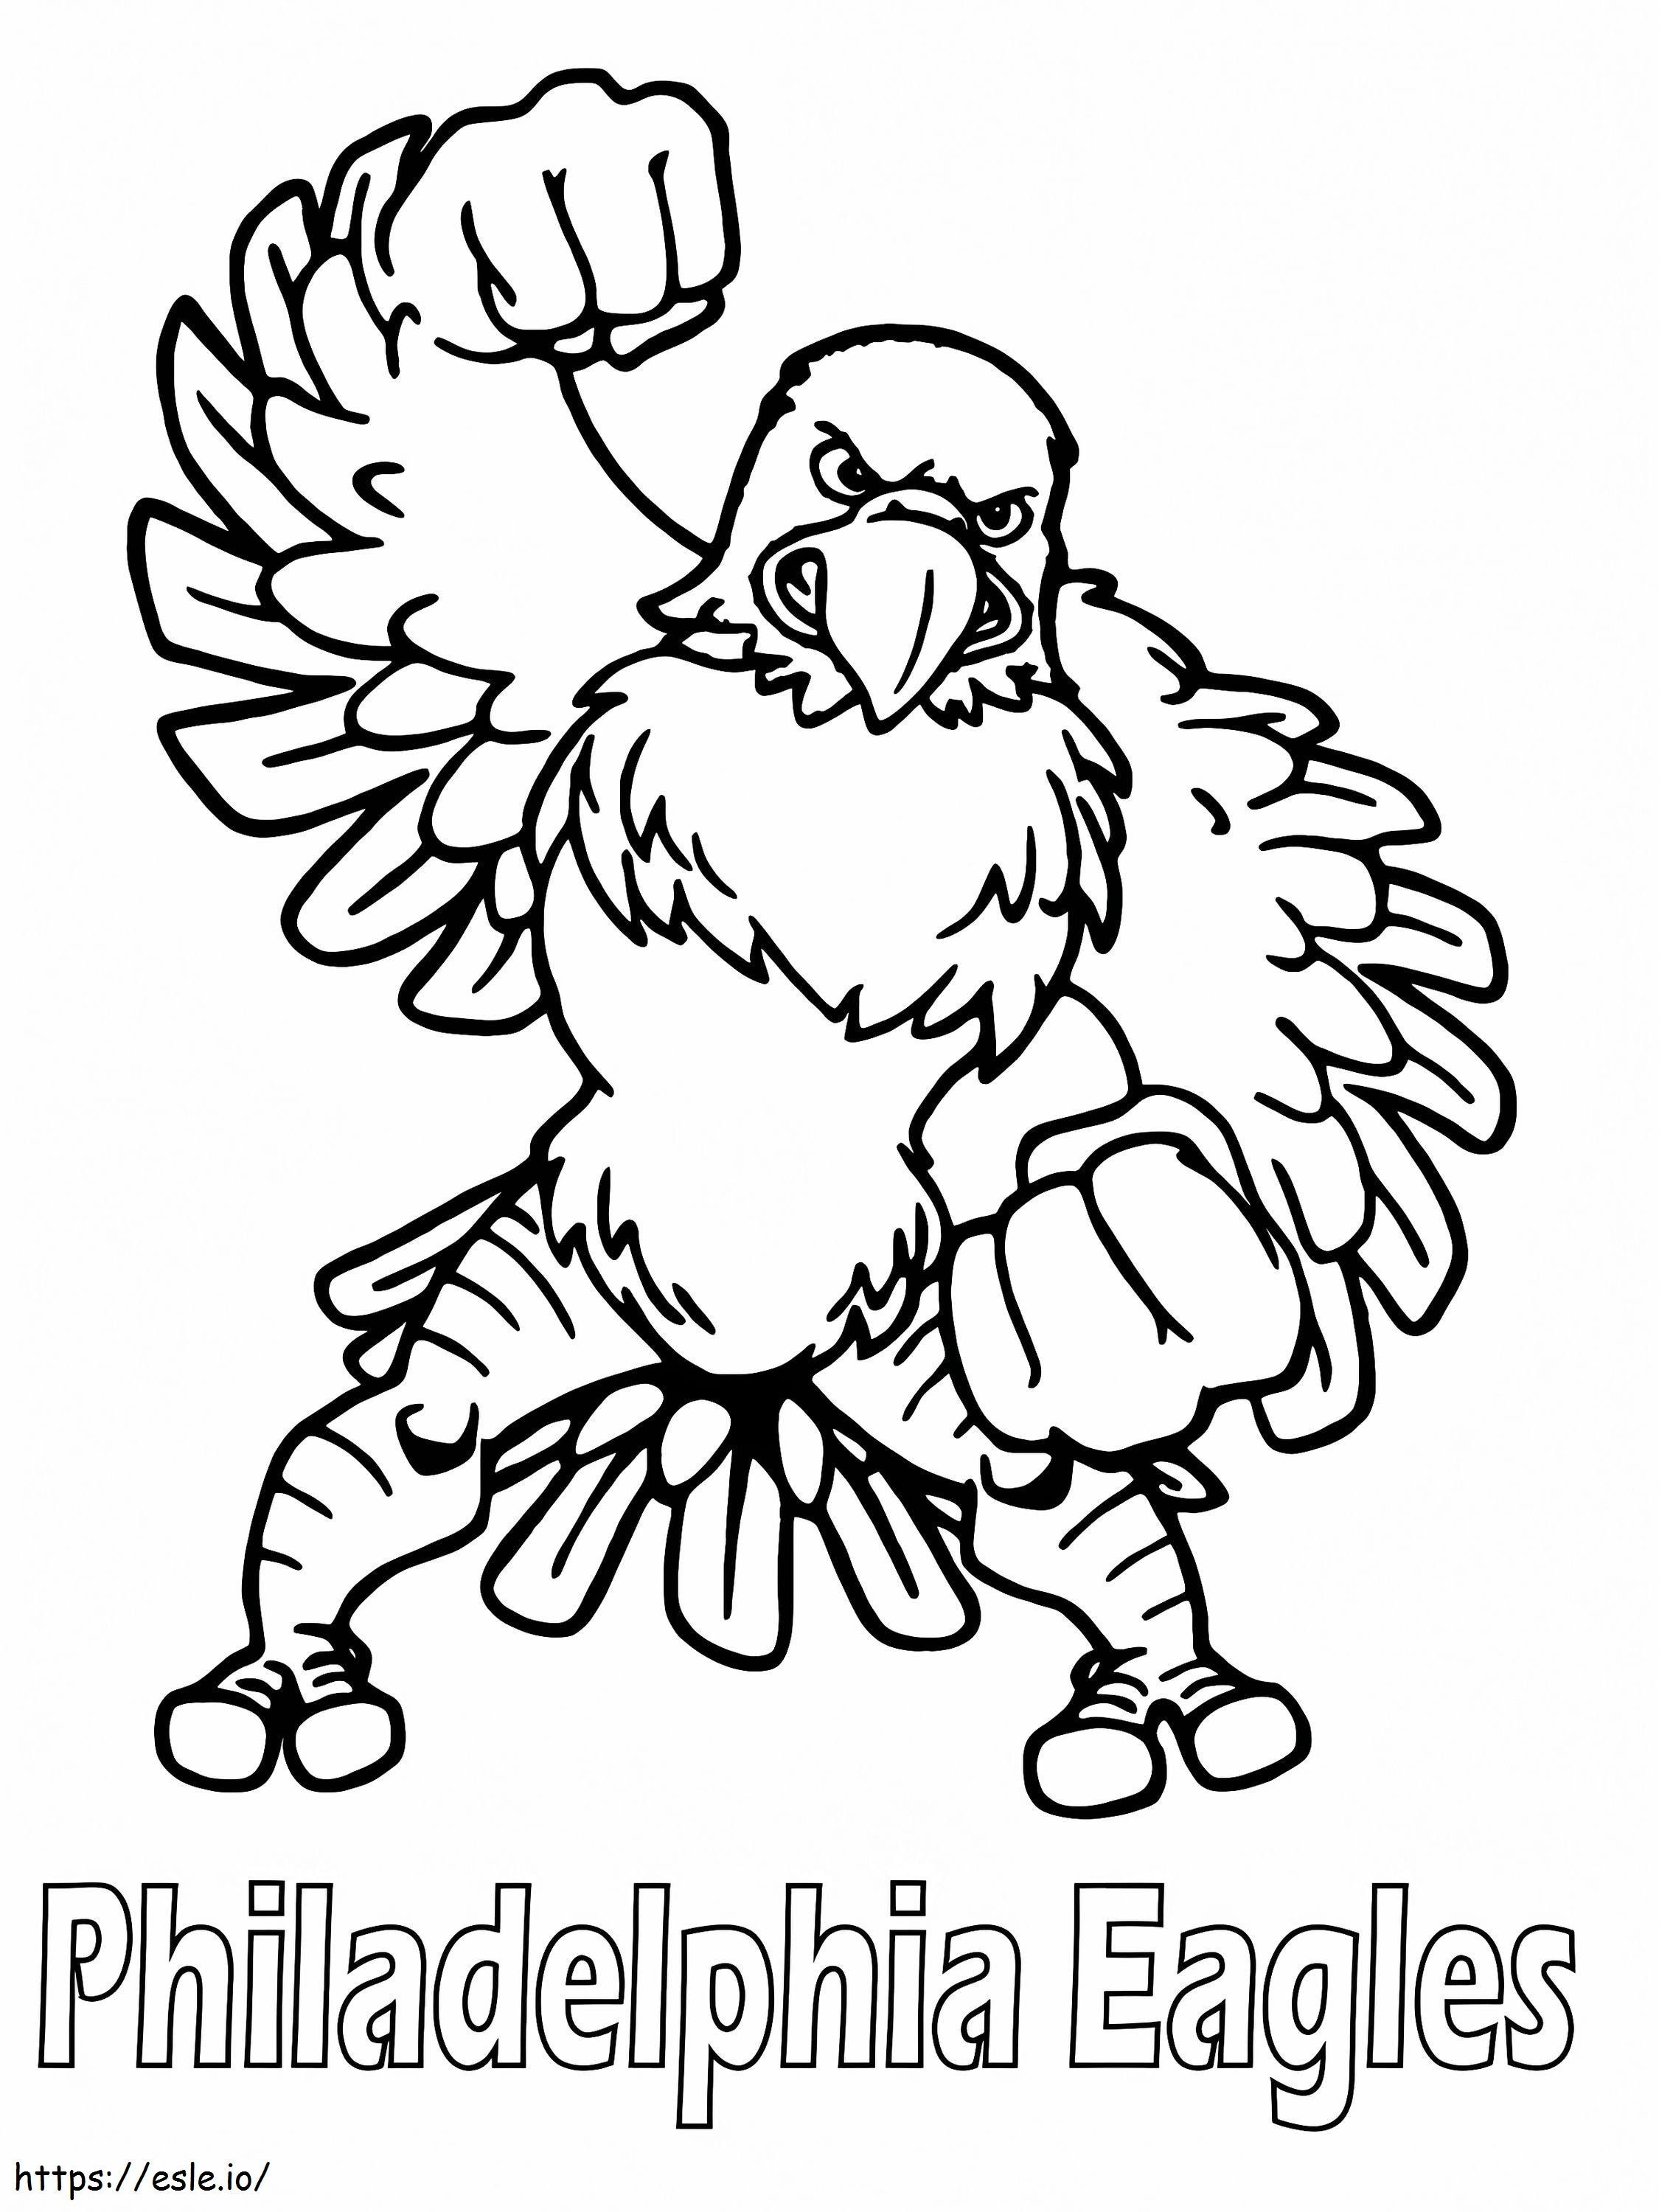 Strong Swoop Nfl coloring page